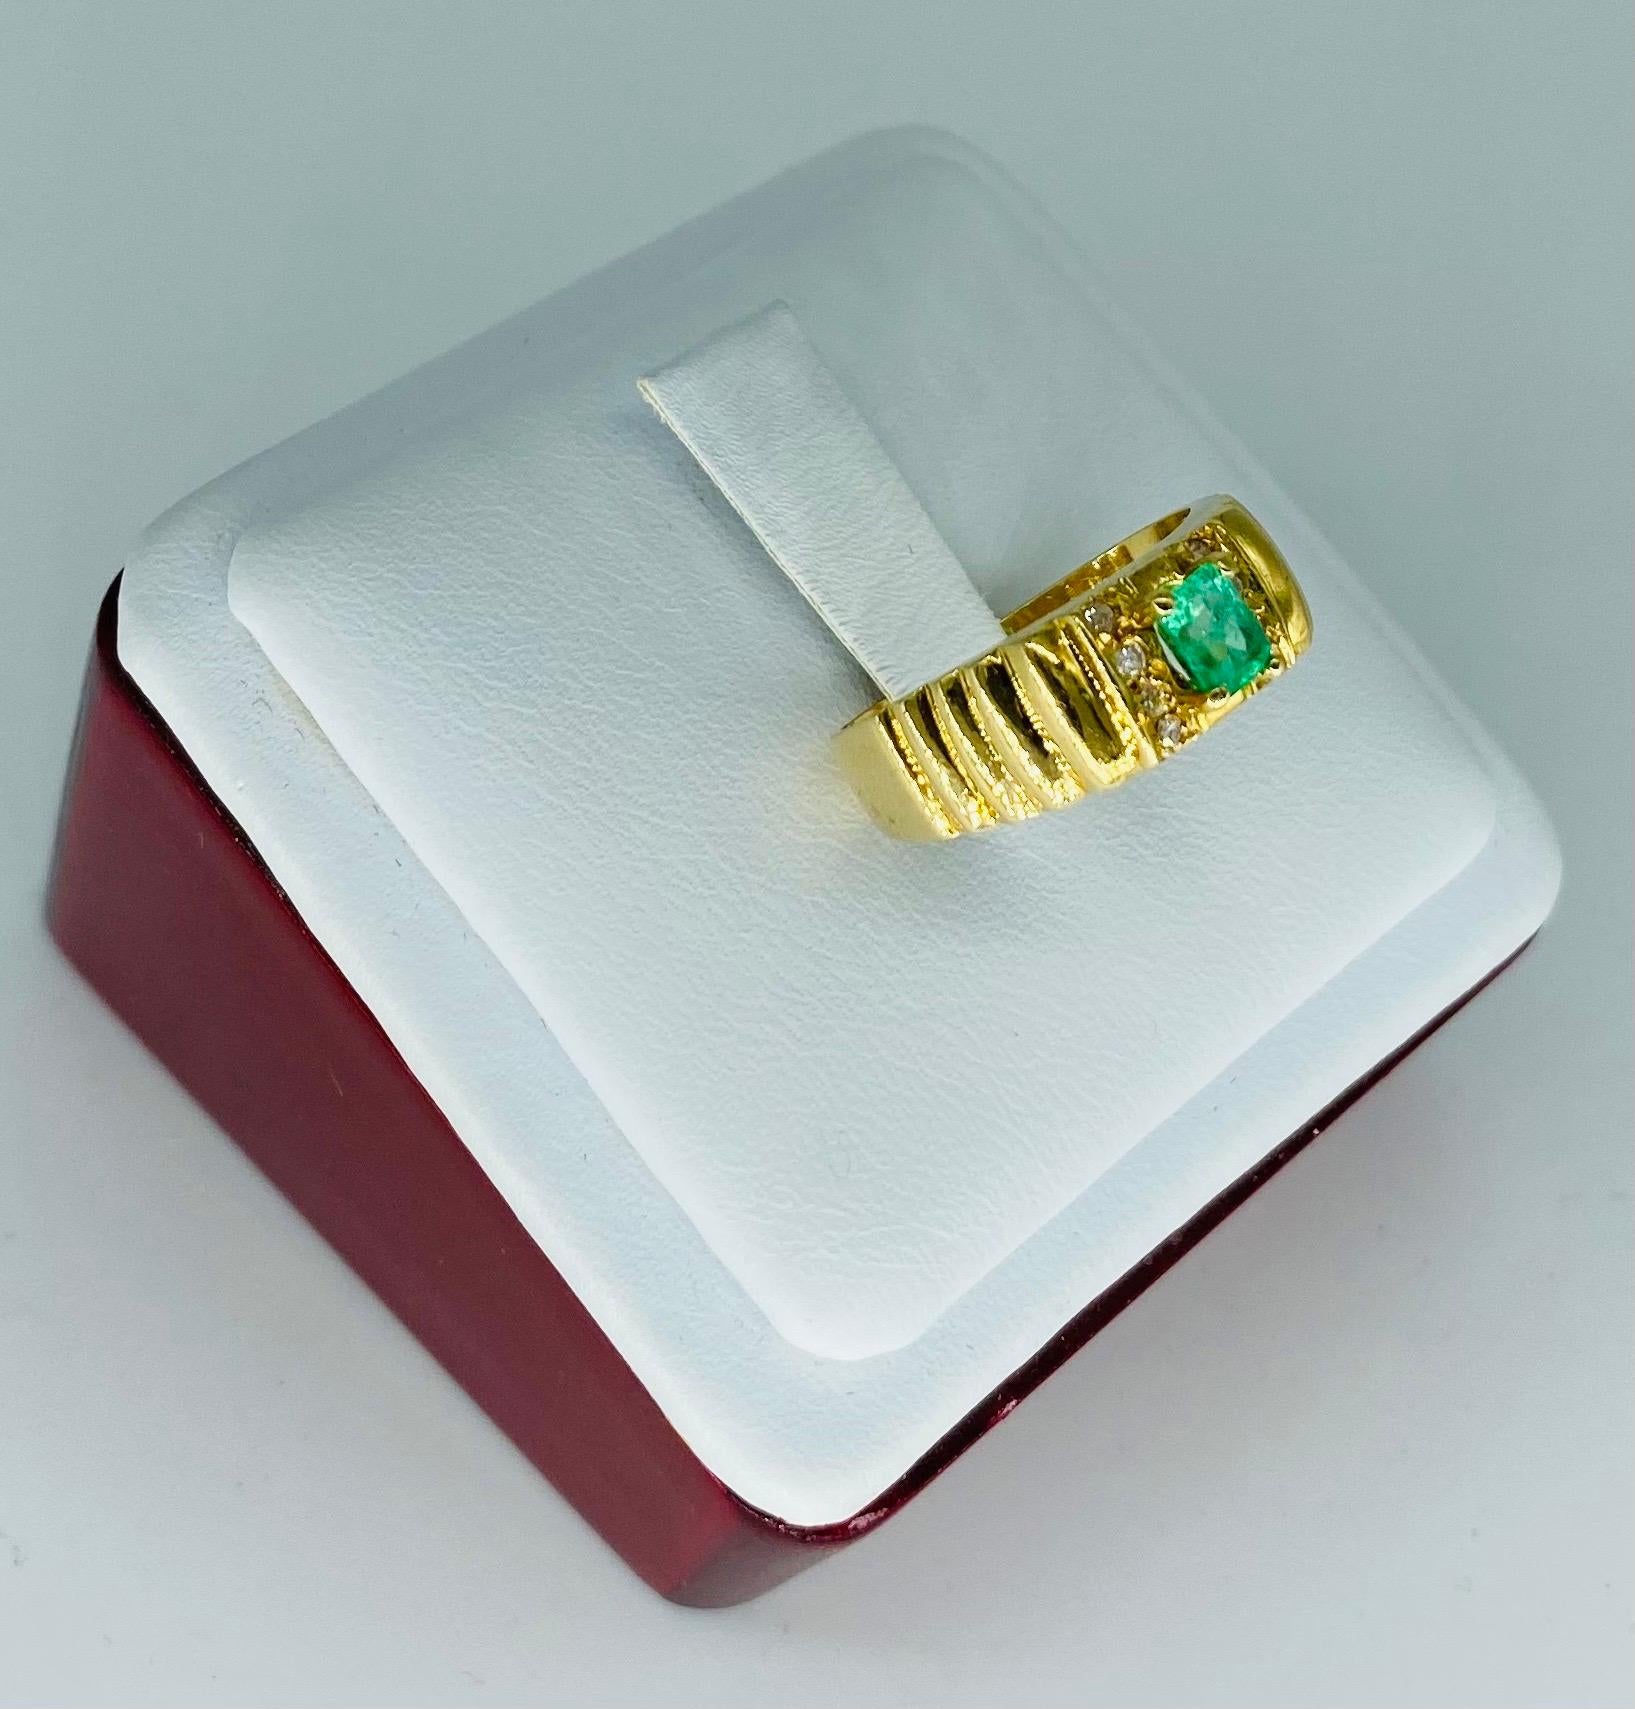 Vintage 0.50 Carat Colombian Emerald Ring 18k Gold.
Beautiful ring featuring 8 round diamonds and a center Colombian Emerald gemstone, all weighting a total of approx 0.50 carat. The ring is a size 6.5 and weights 4.3 grams 18k gold.